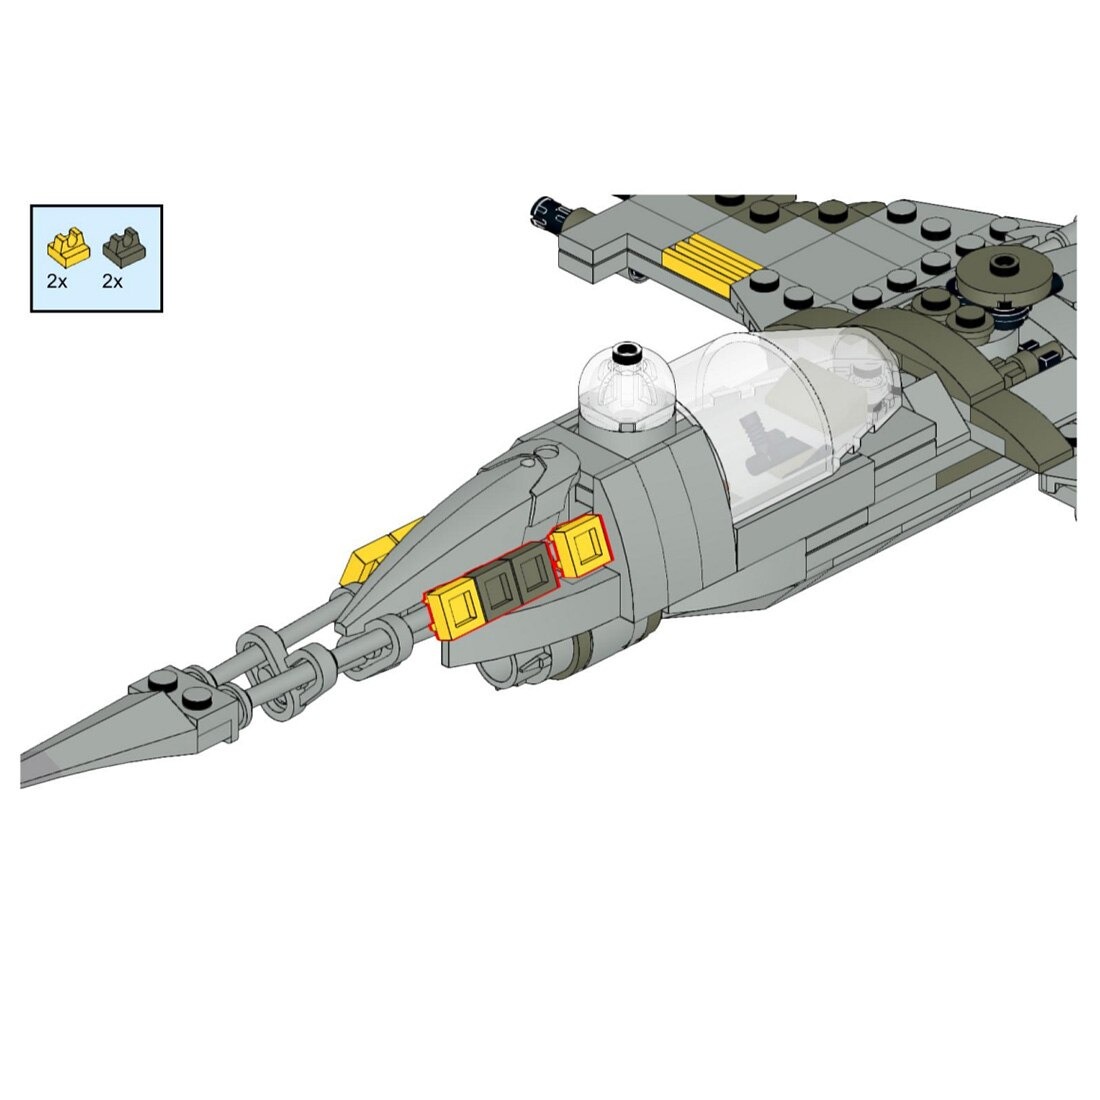 MOC Factory 100546 Mandalorian N1 Starfighter with 374 Pieces 